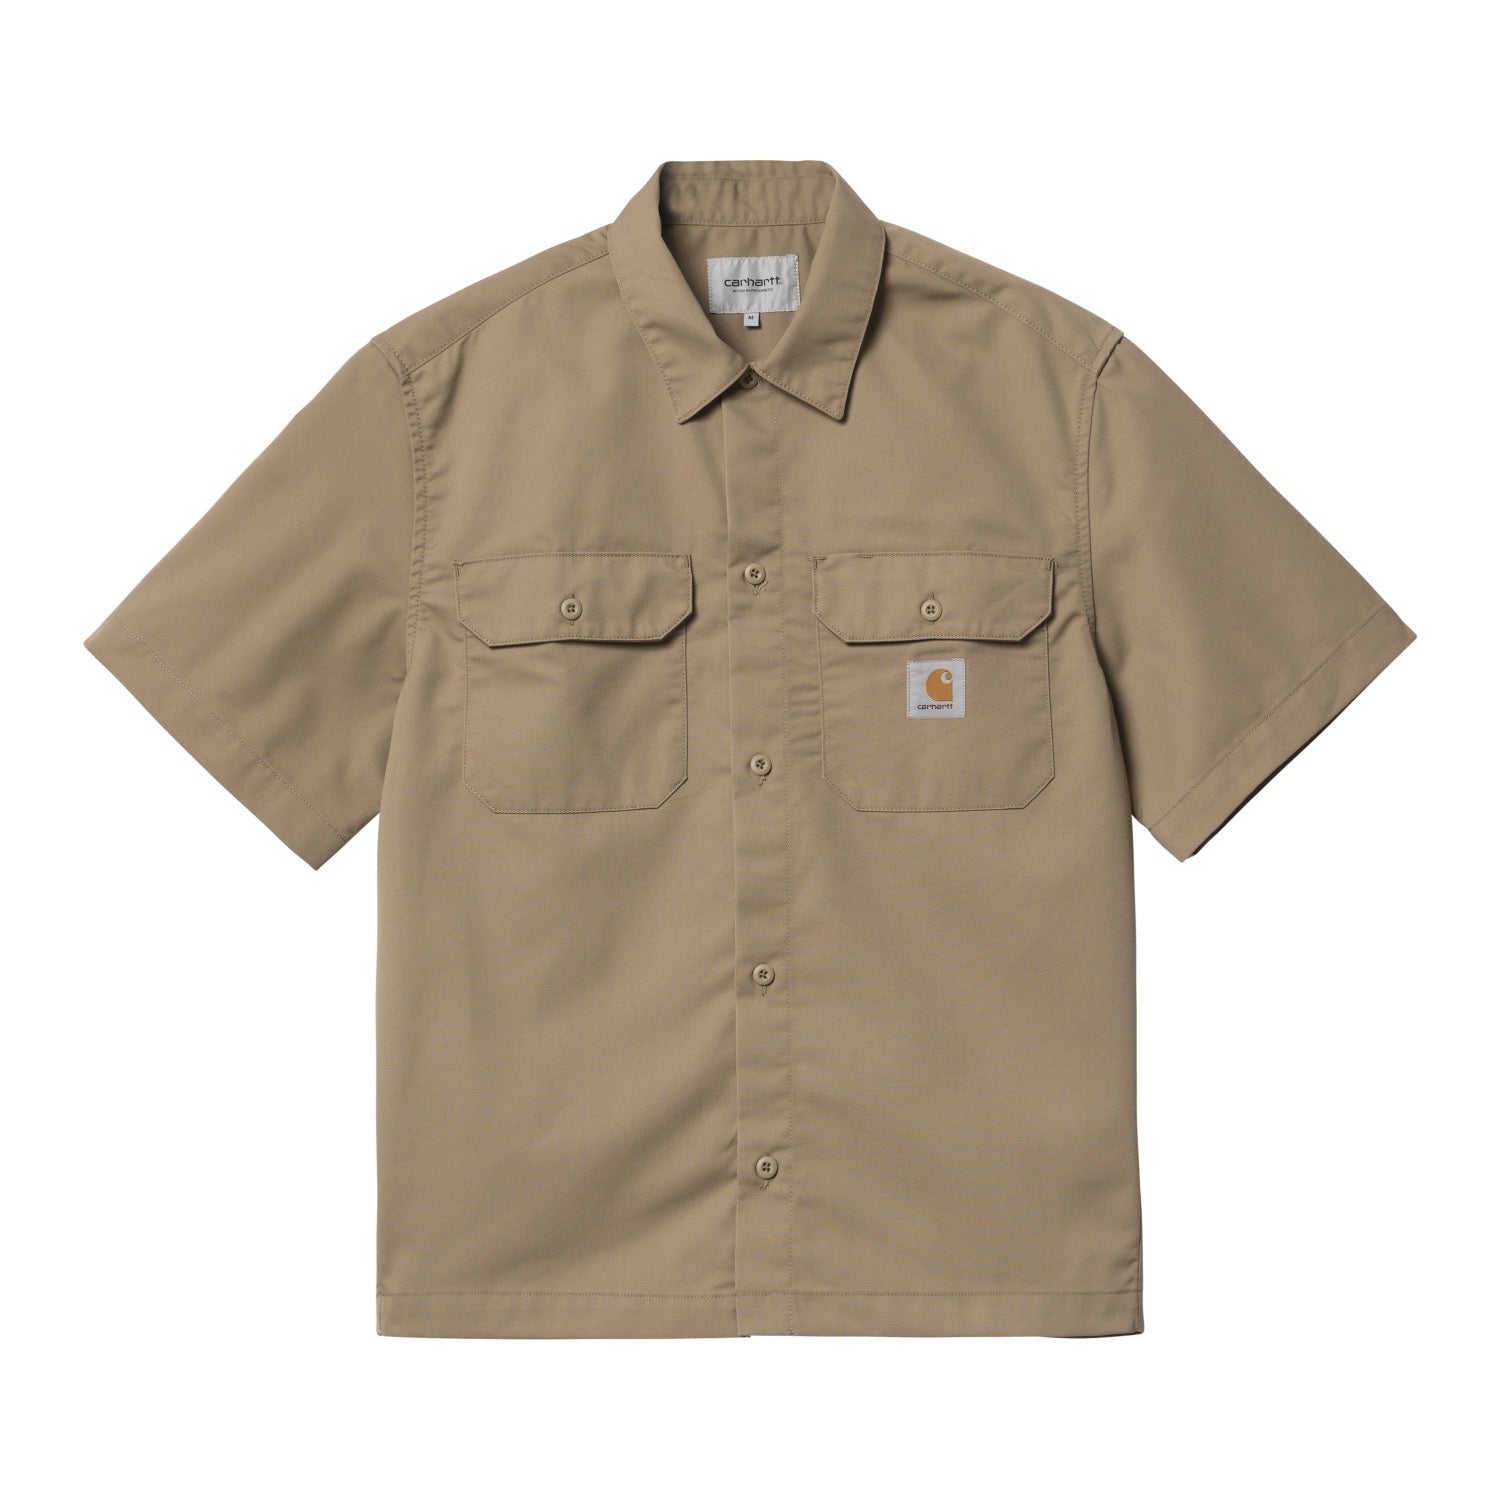 S/S CRAFT SHIRT - Leather (rinsed)